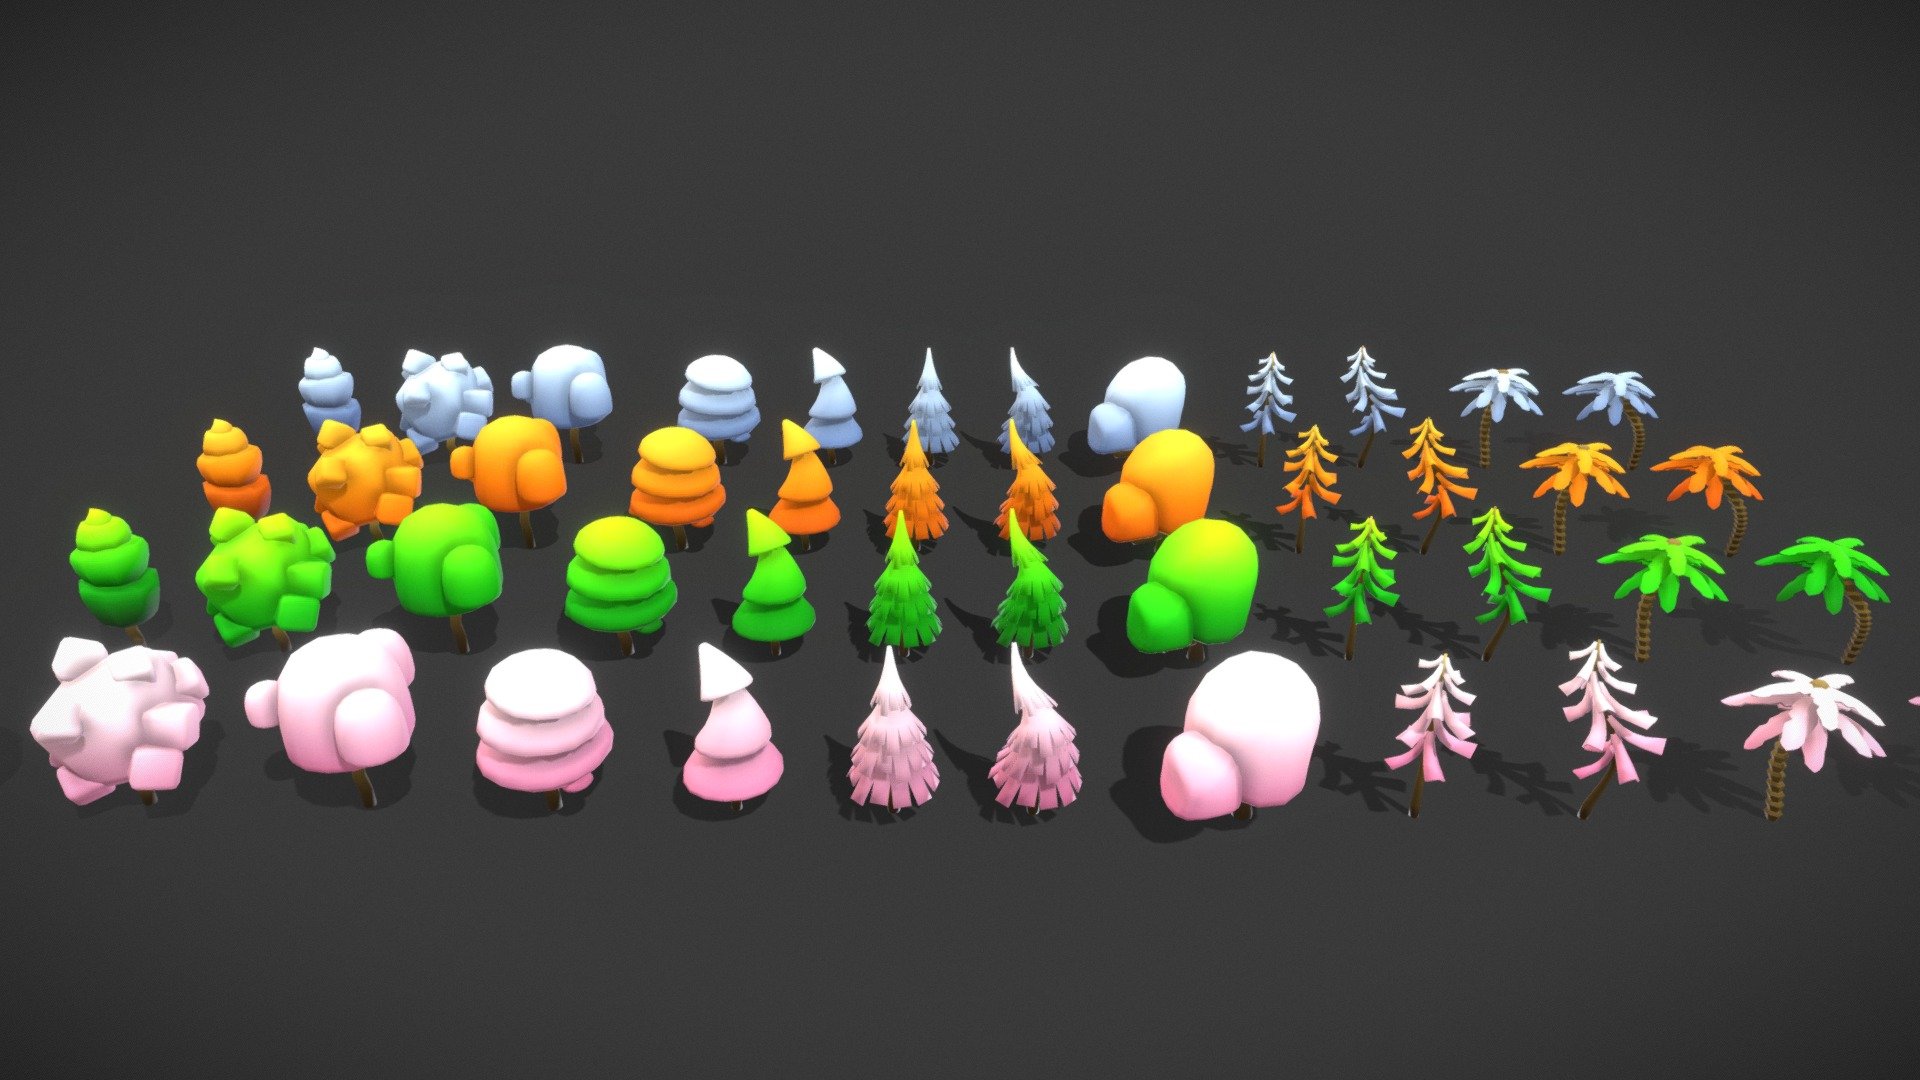 Good day, i hope you will like this trees pack.

Checkout my other low poly packs:

Flower Pack: https://sketchfab.com/3d-models/stylize-low-poly-flowers-pack-dc6474e66ec4493ea55af5332638fdd9

Tree Pack: https://sketchfab.com/3d-models/stylize-low-poly-trees-pack-3ccc978e370b42e5a3f4af85c1f05f7b - Stylize Low Poly Trees Pack - Buy Royalty Free 3D model by LowPolyBoy 3d model